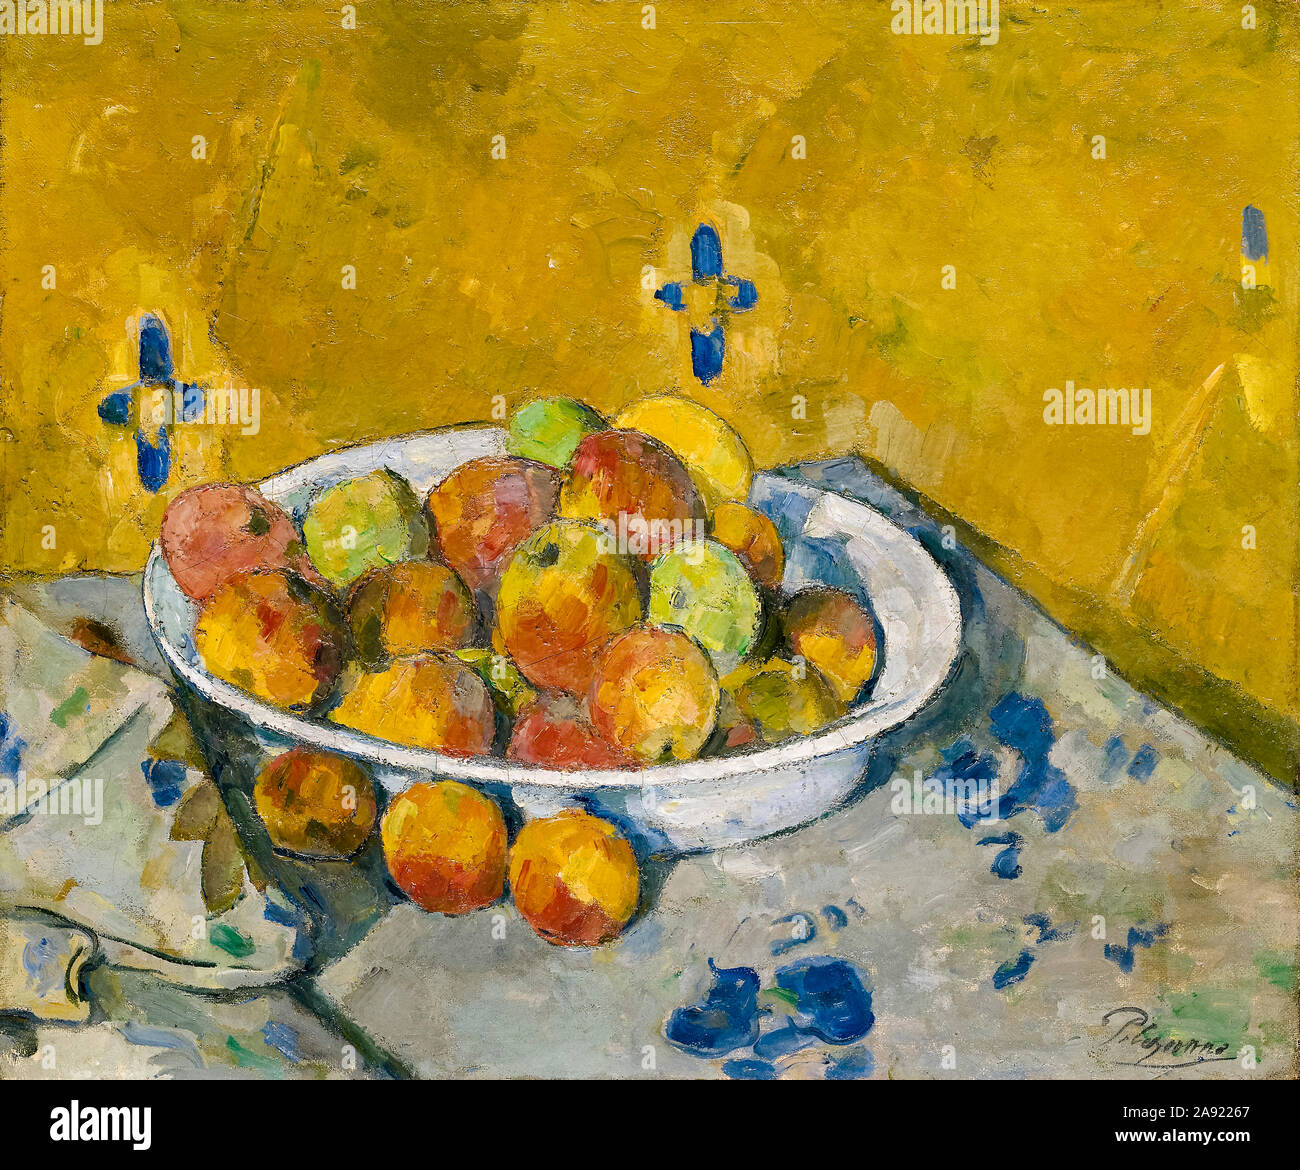 Paul Cezanne, still life painting, The Plate of Apples, circa 1877 Stock Photo